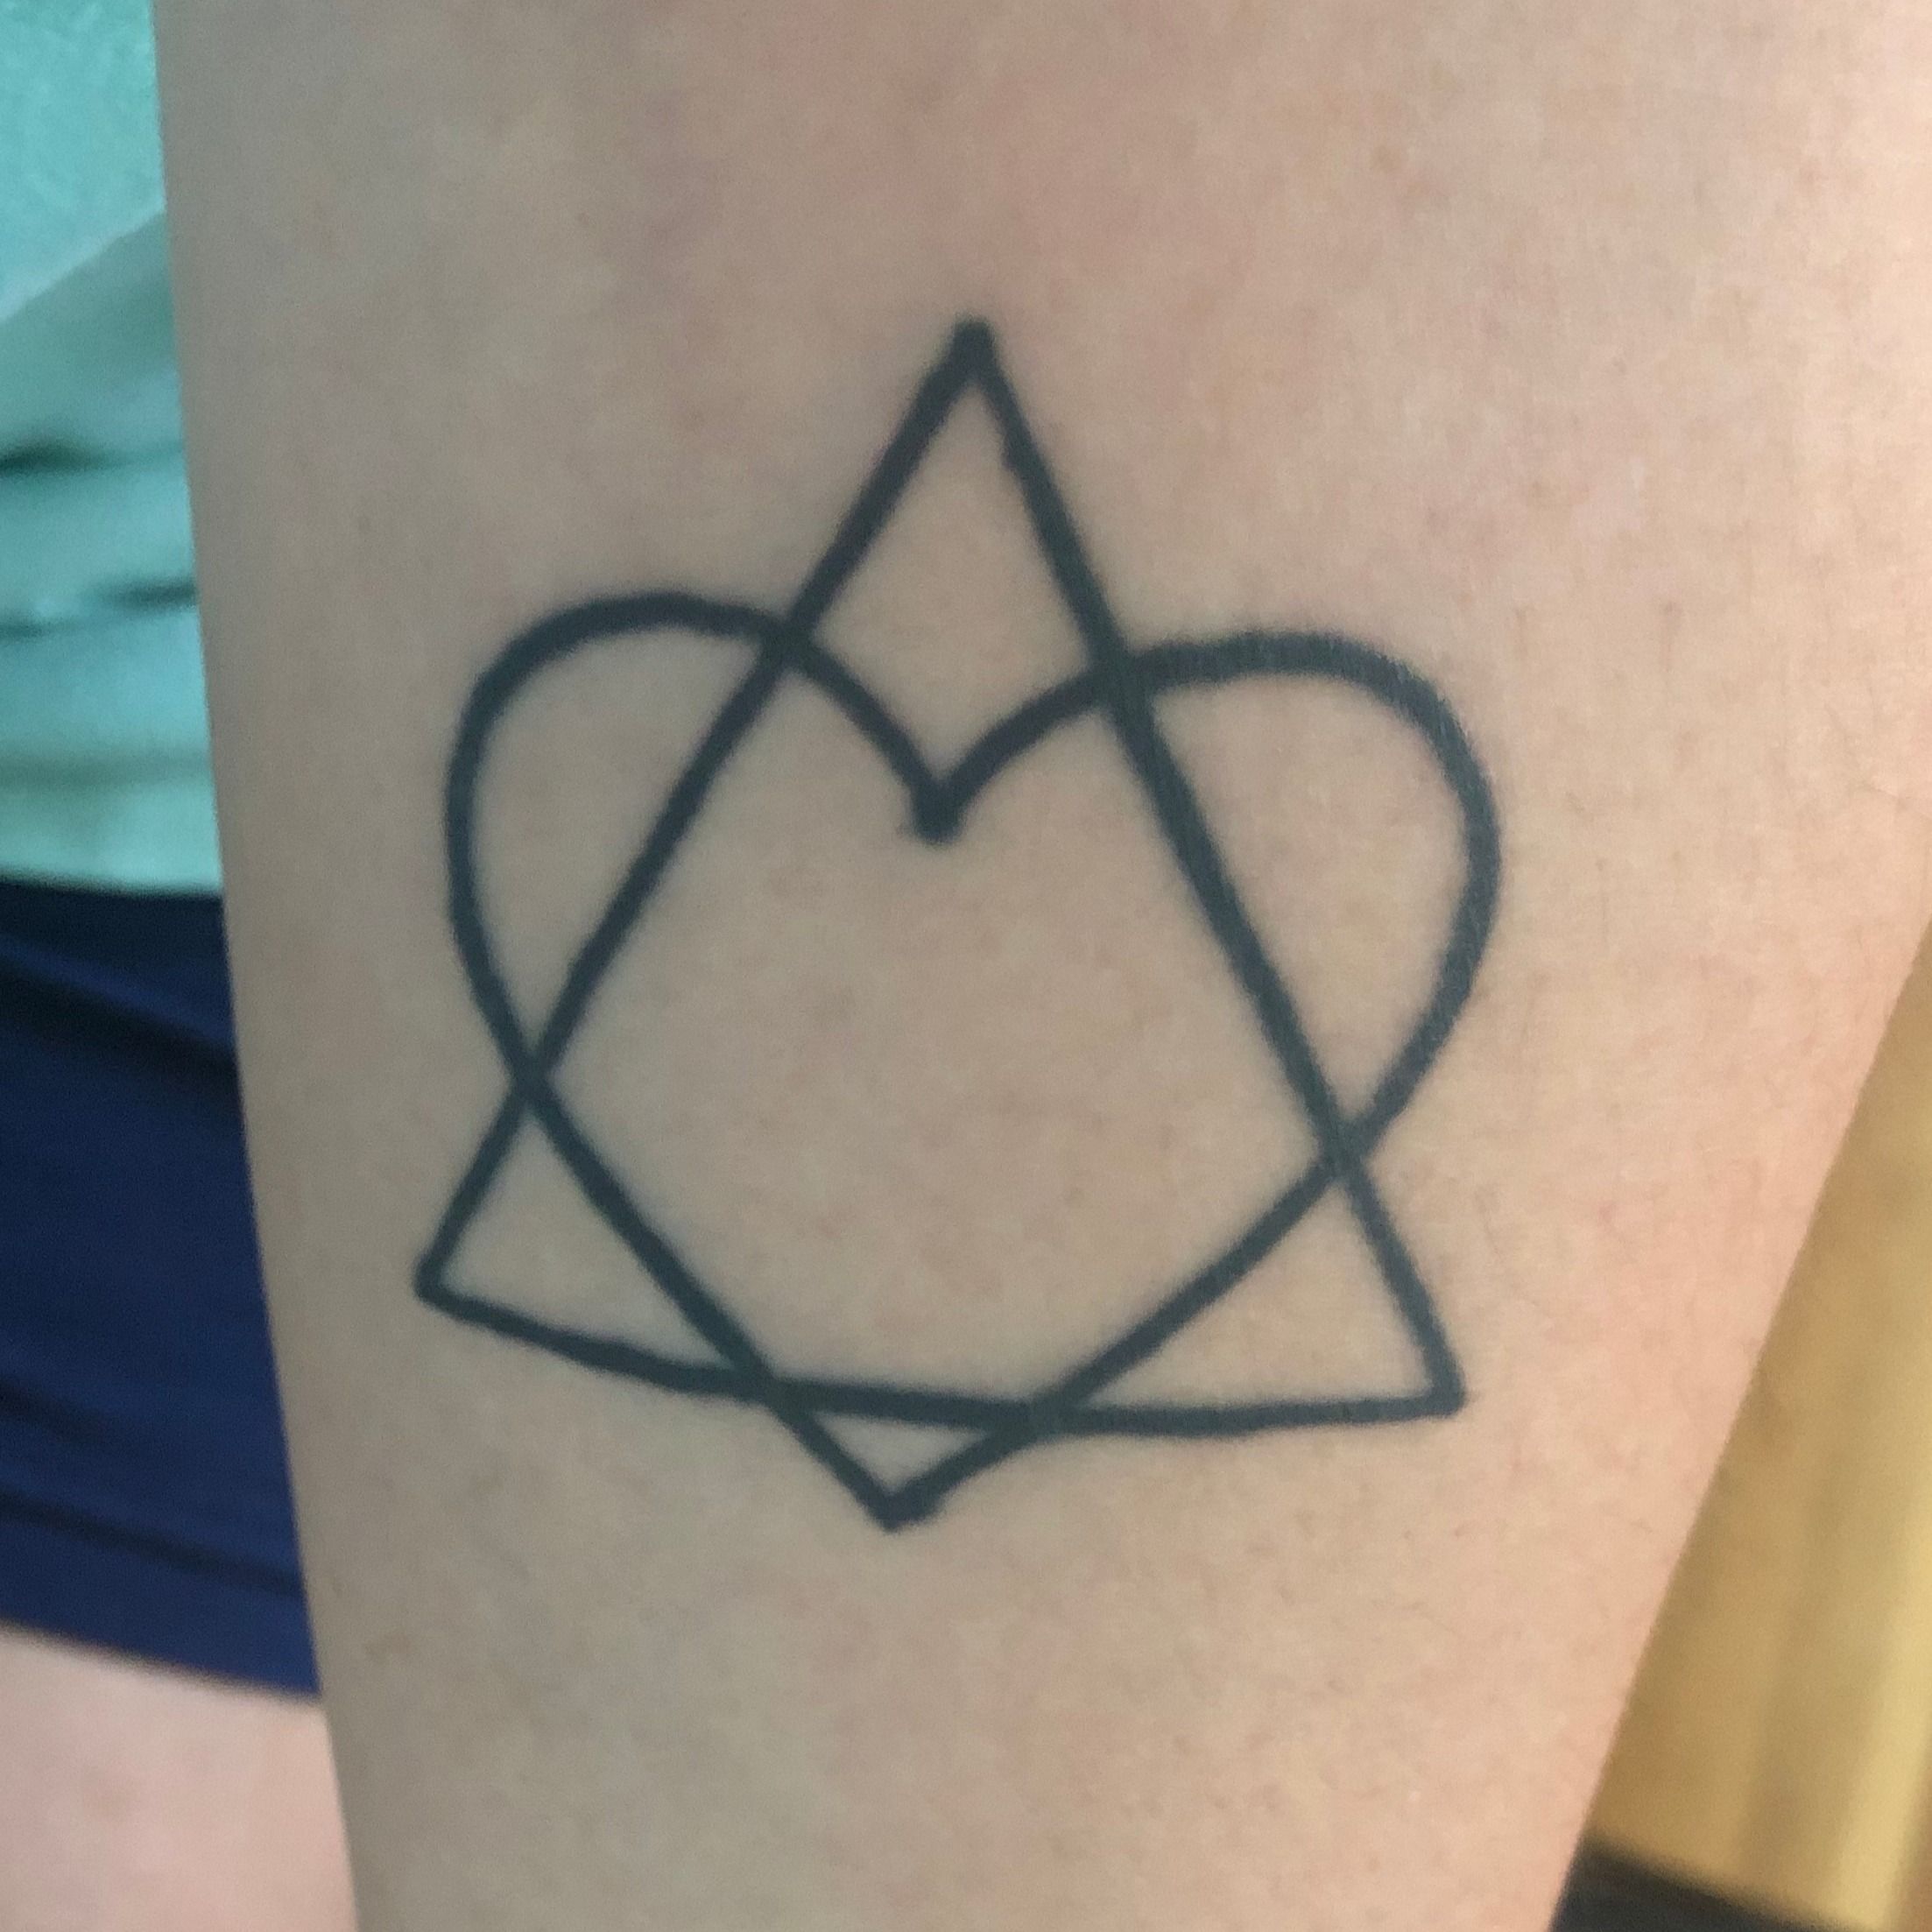 Black Heart Tattoo Studio Ltd  Adoption symbol by Dallas today for Lisa  lower Tattoo not by us but will probably tidy it up for her    Supplies from tattooeverythingsupplies and